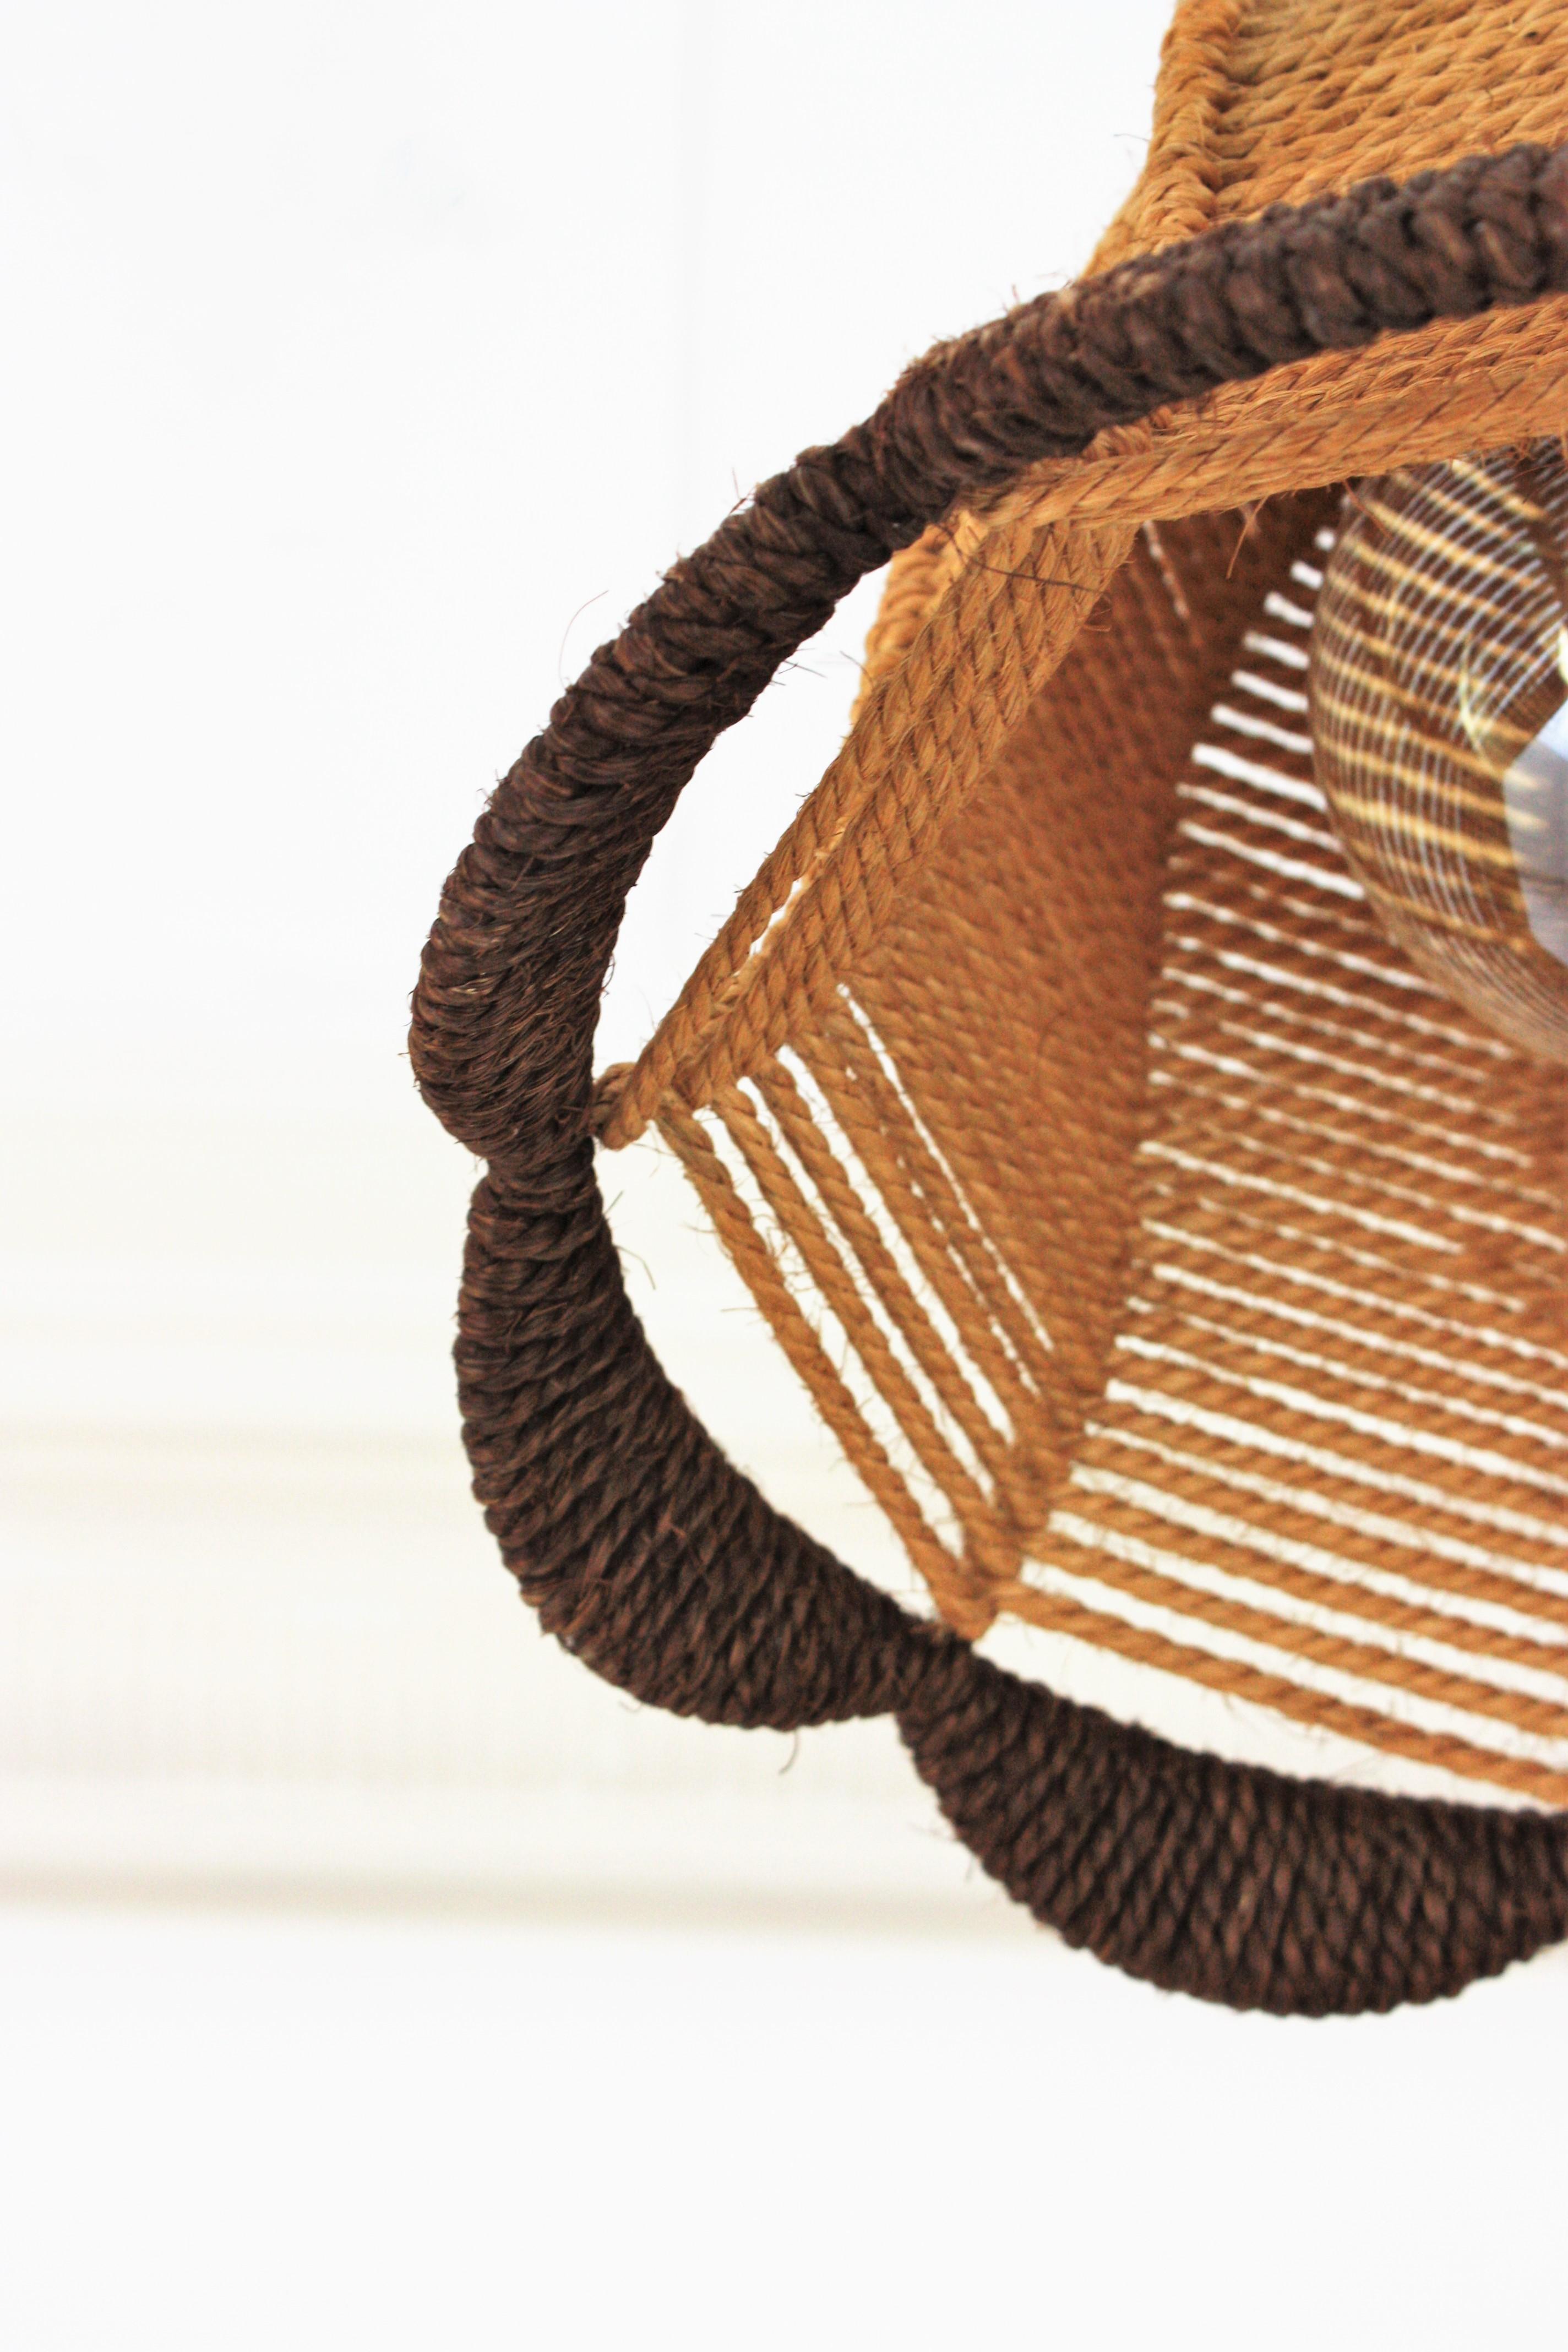 Rattan and Rope Bell Ceiling Pendant Light Hanging Lamp, Spain, 1960s 1